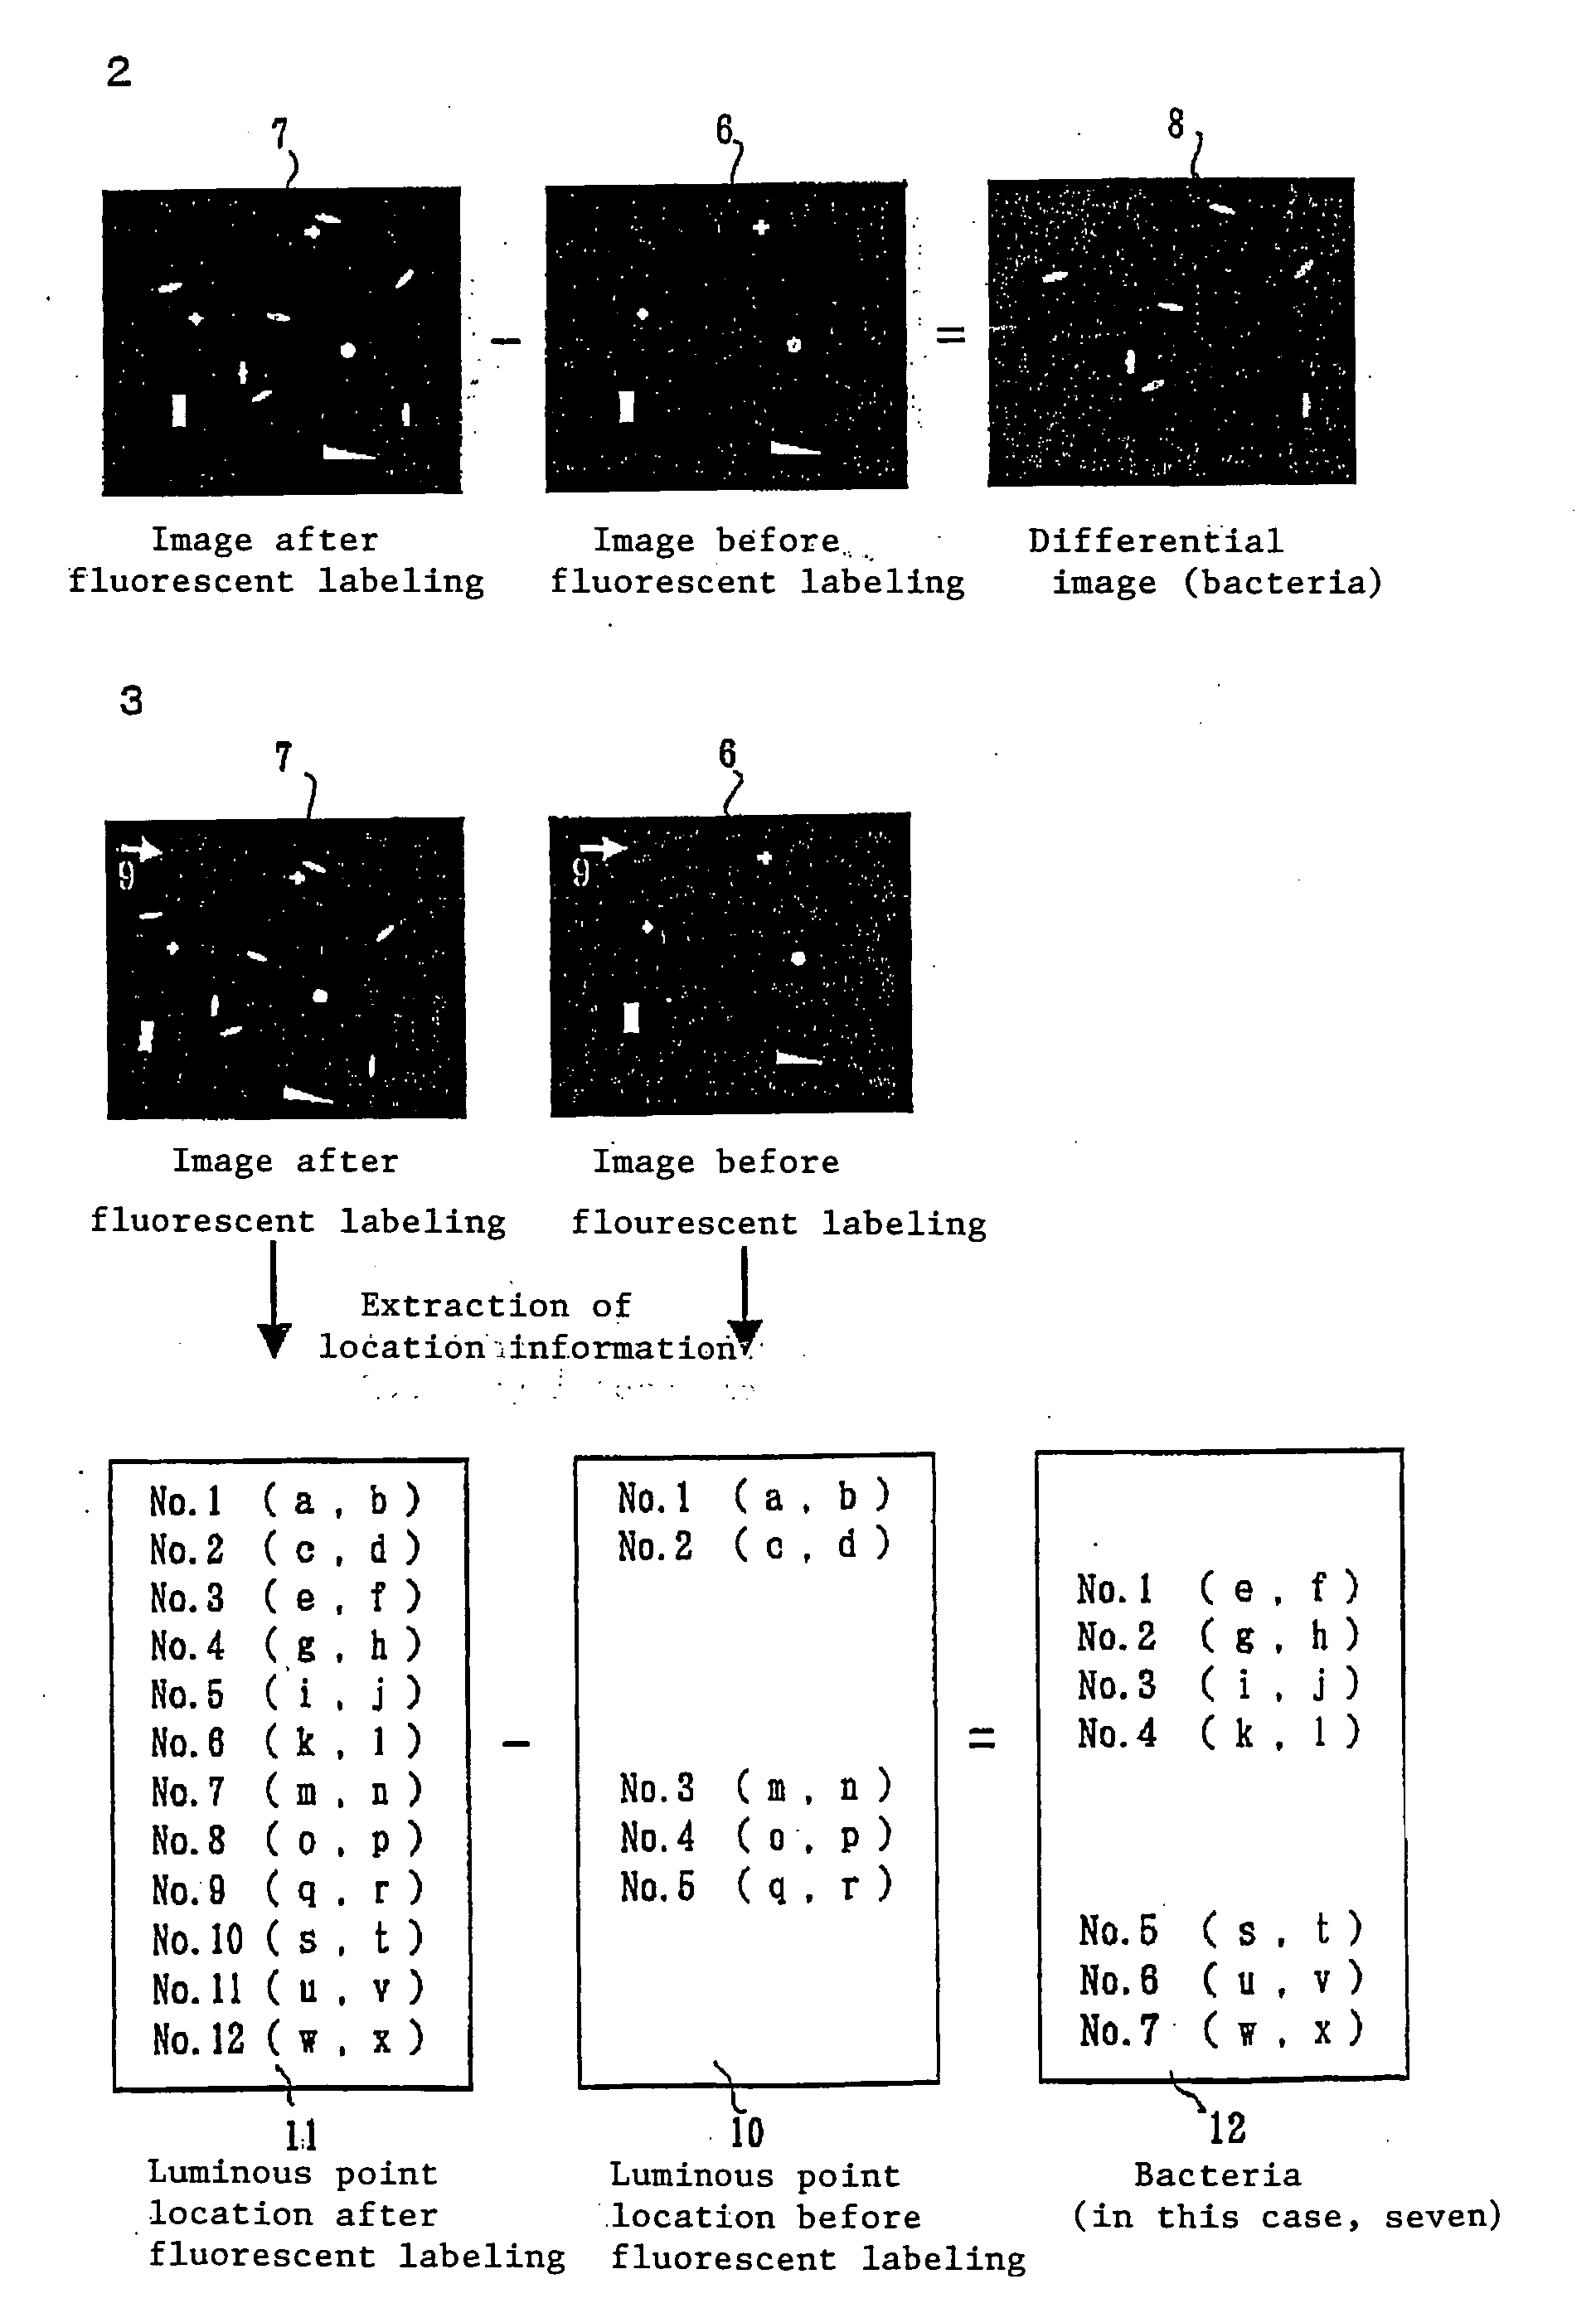 Method of counting microorganisms or cells